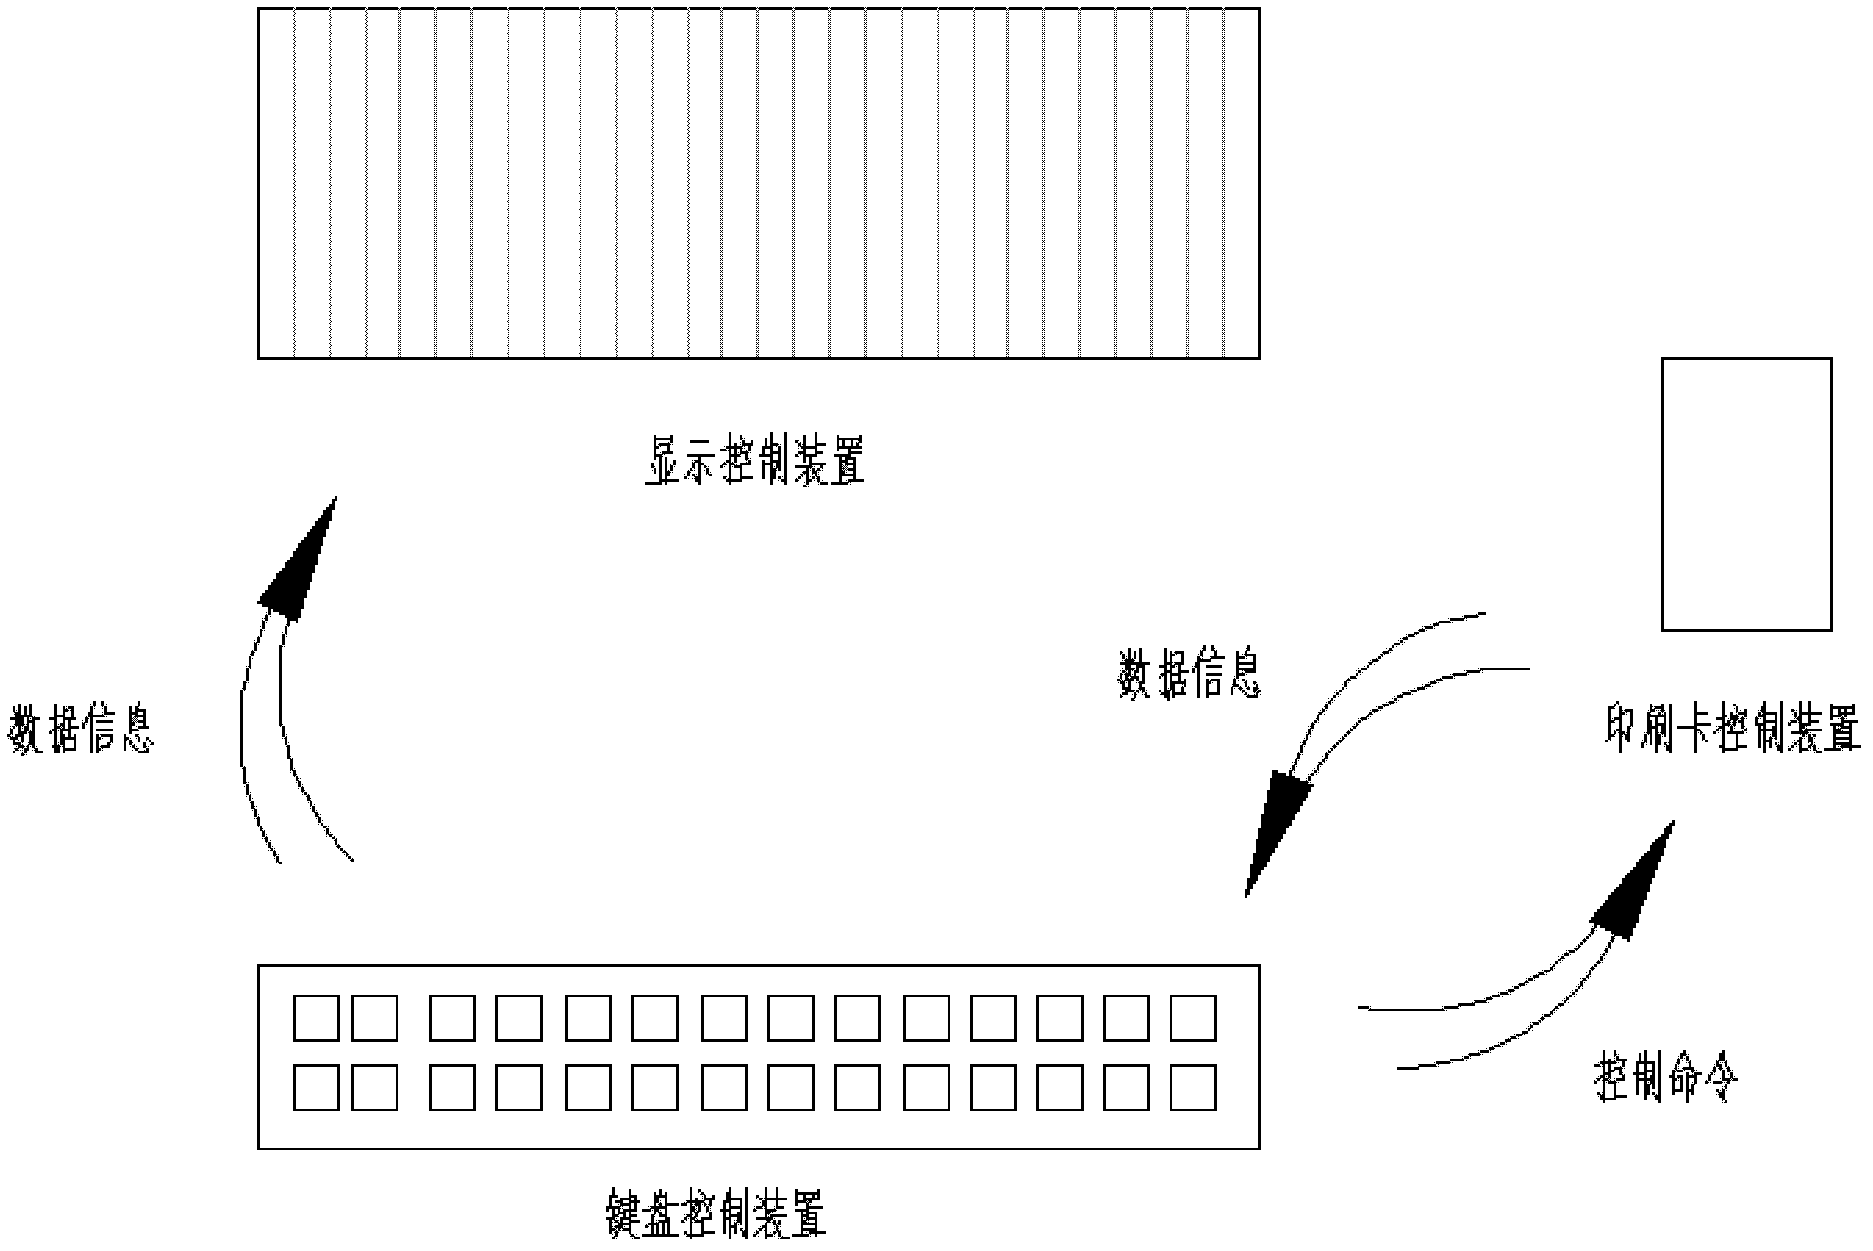 Multipath printing card control system based on single chip microcomputer